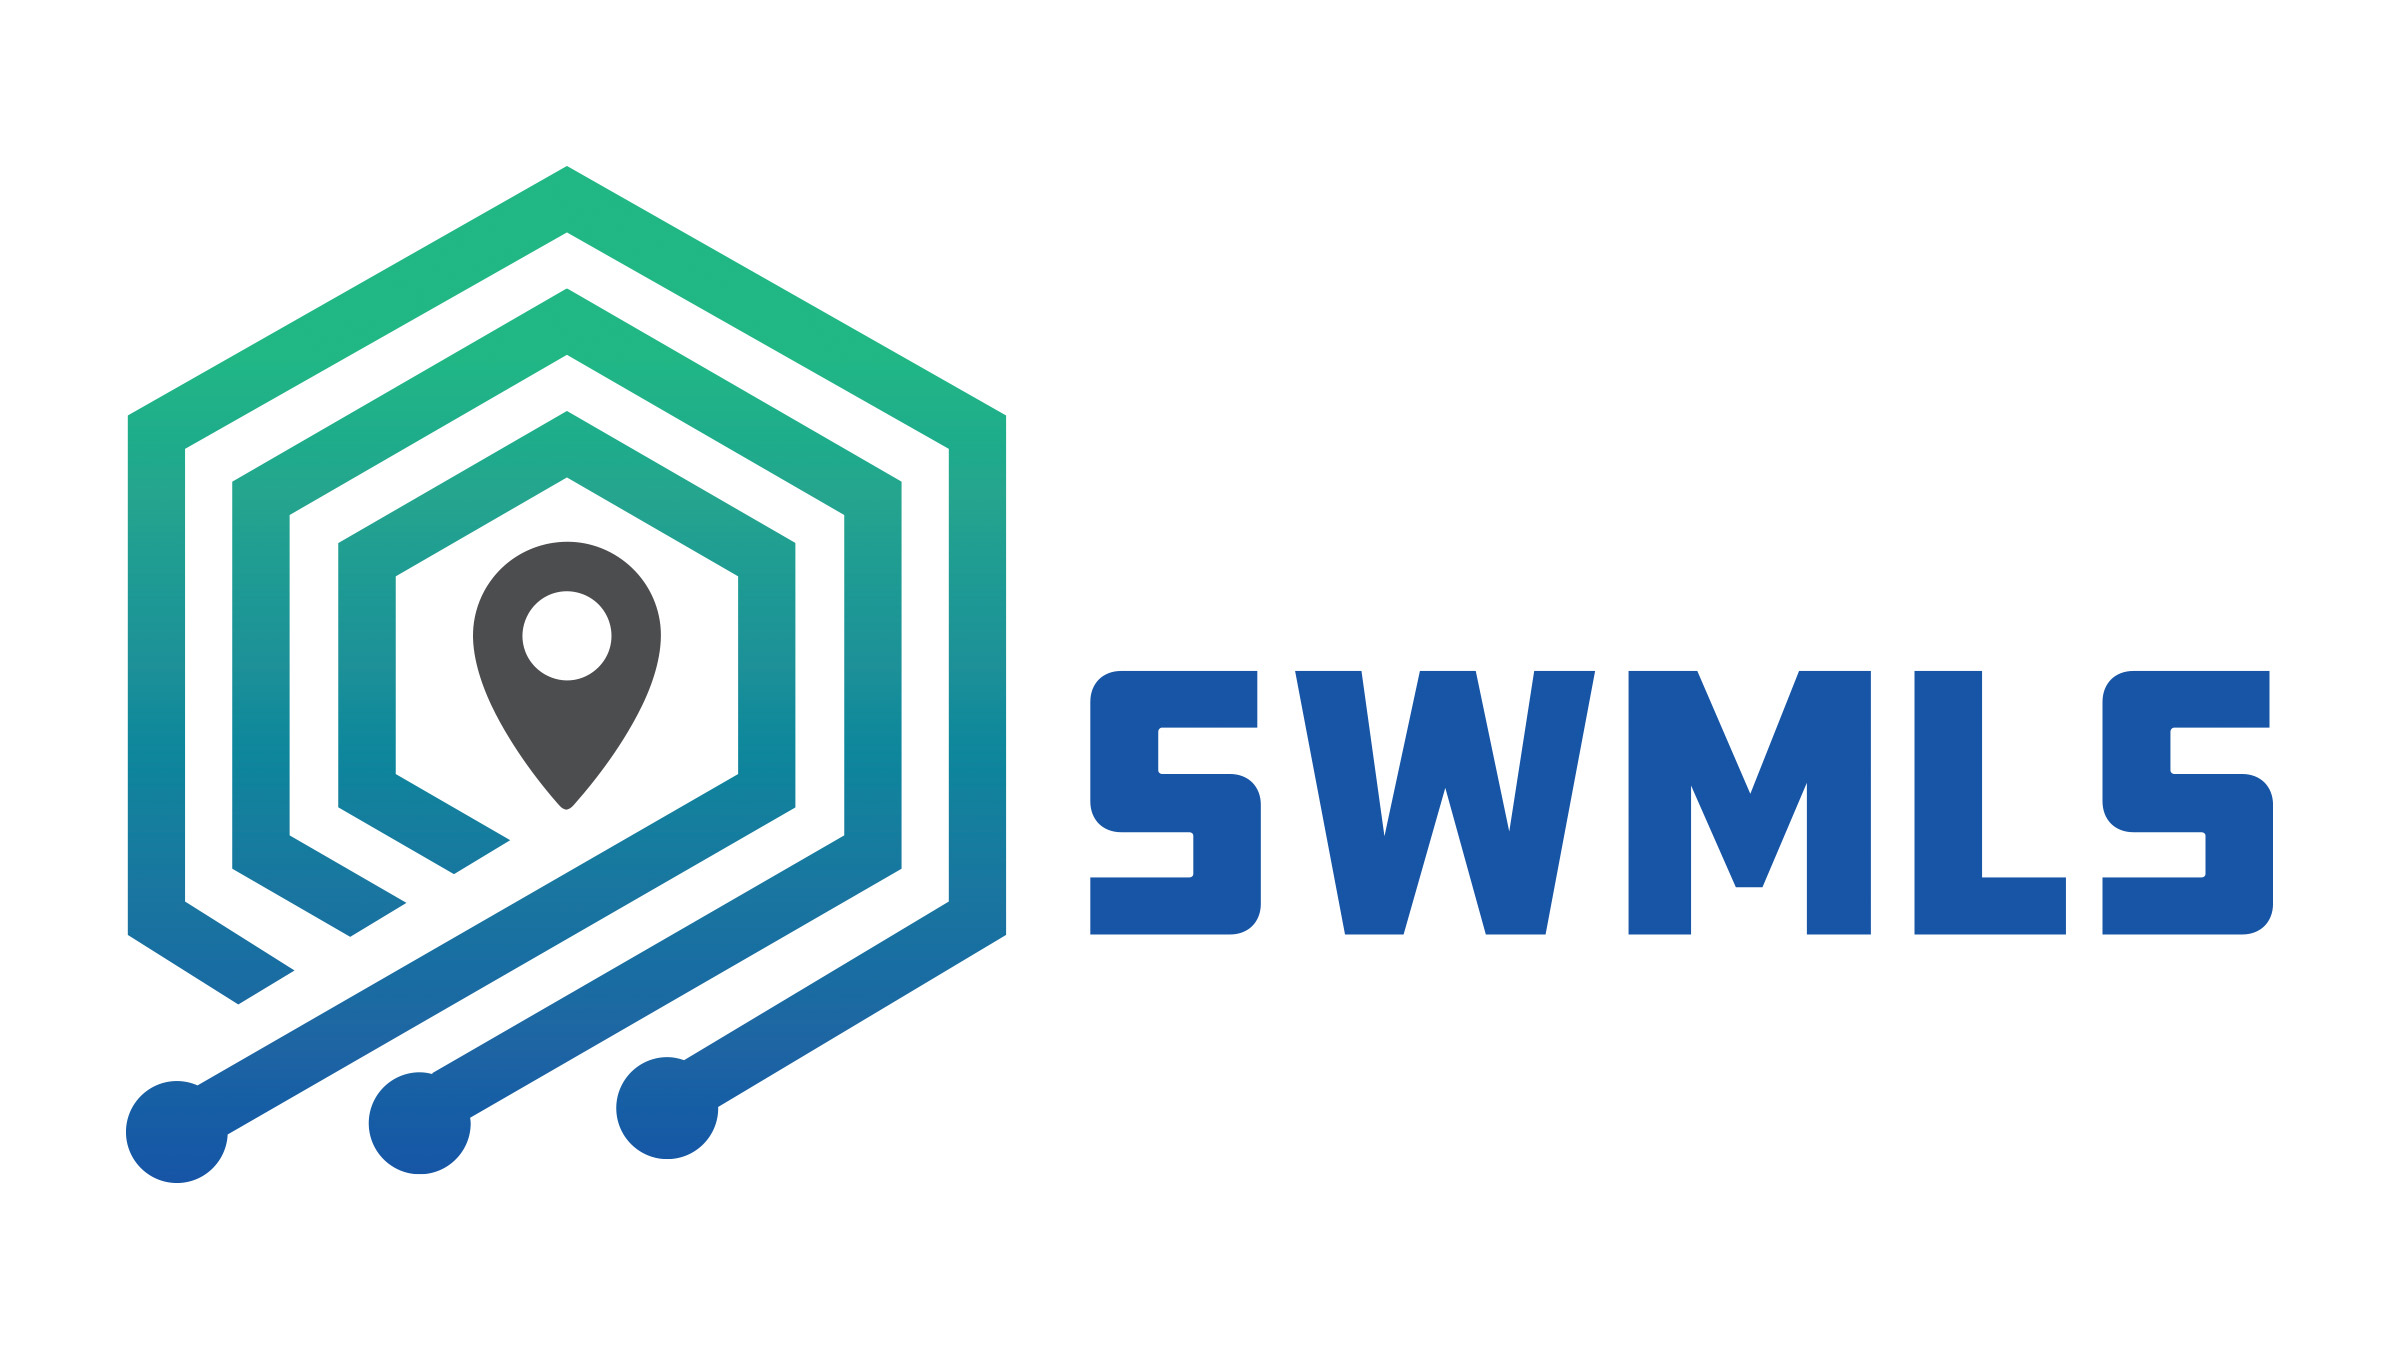 SWMLS Annual Fee is due by June 30th